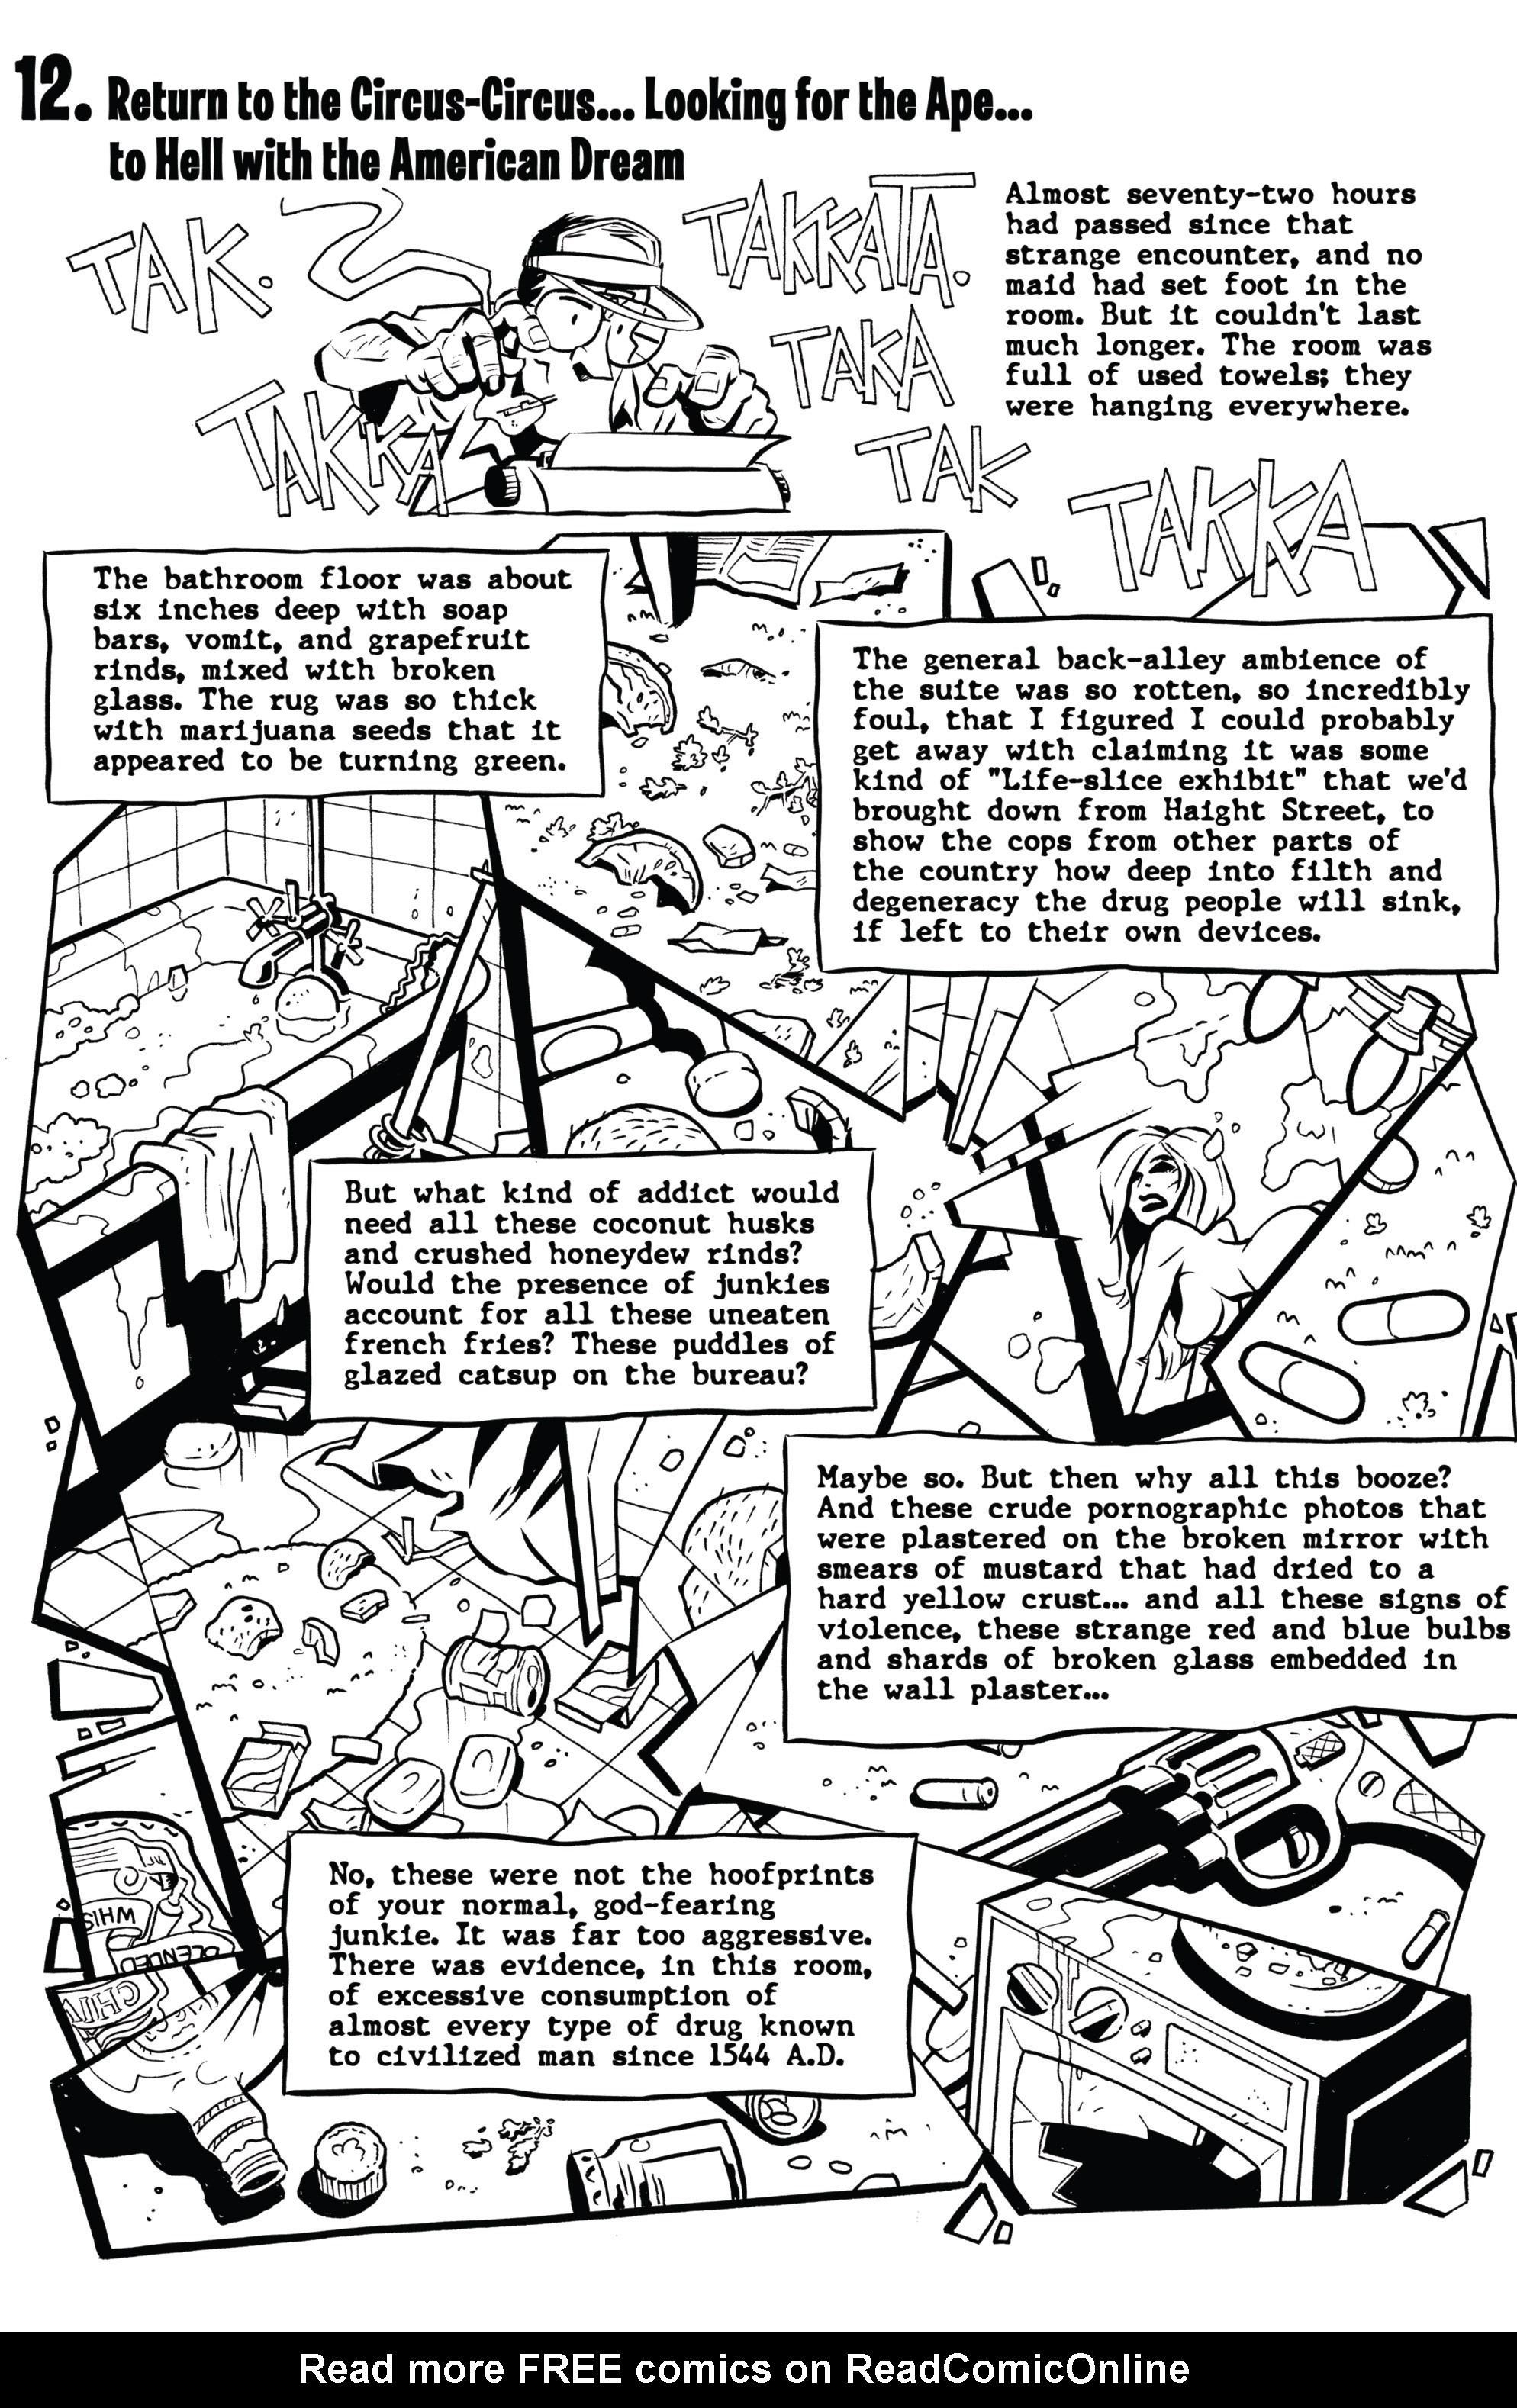 Read online Hunter S. Thompson's Fear and Loathing in Las Vegas comic -  Issue #4 - 33